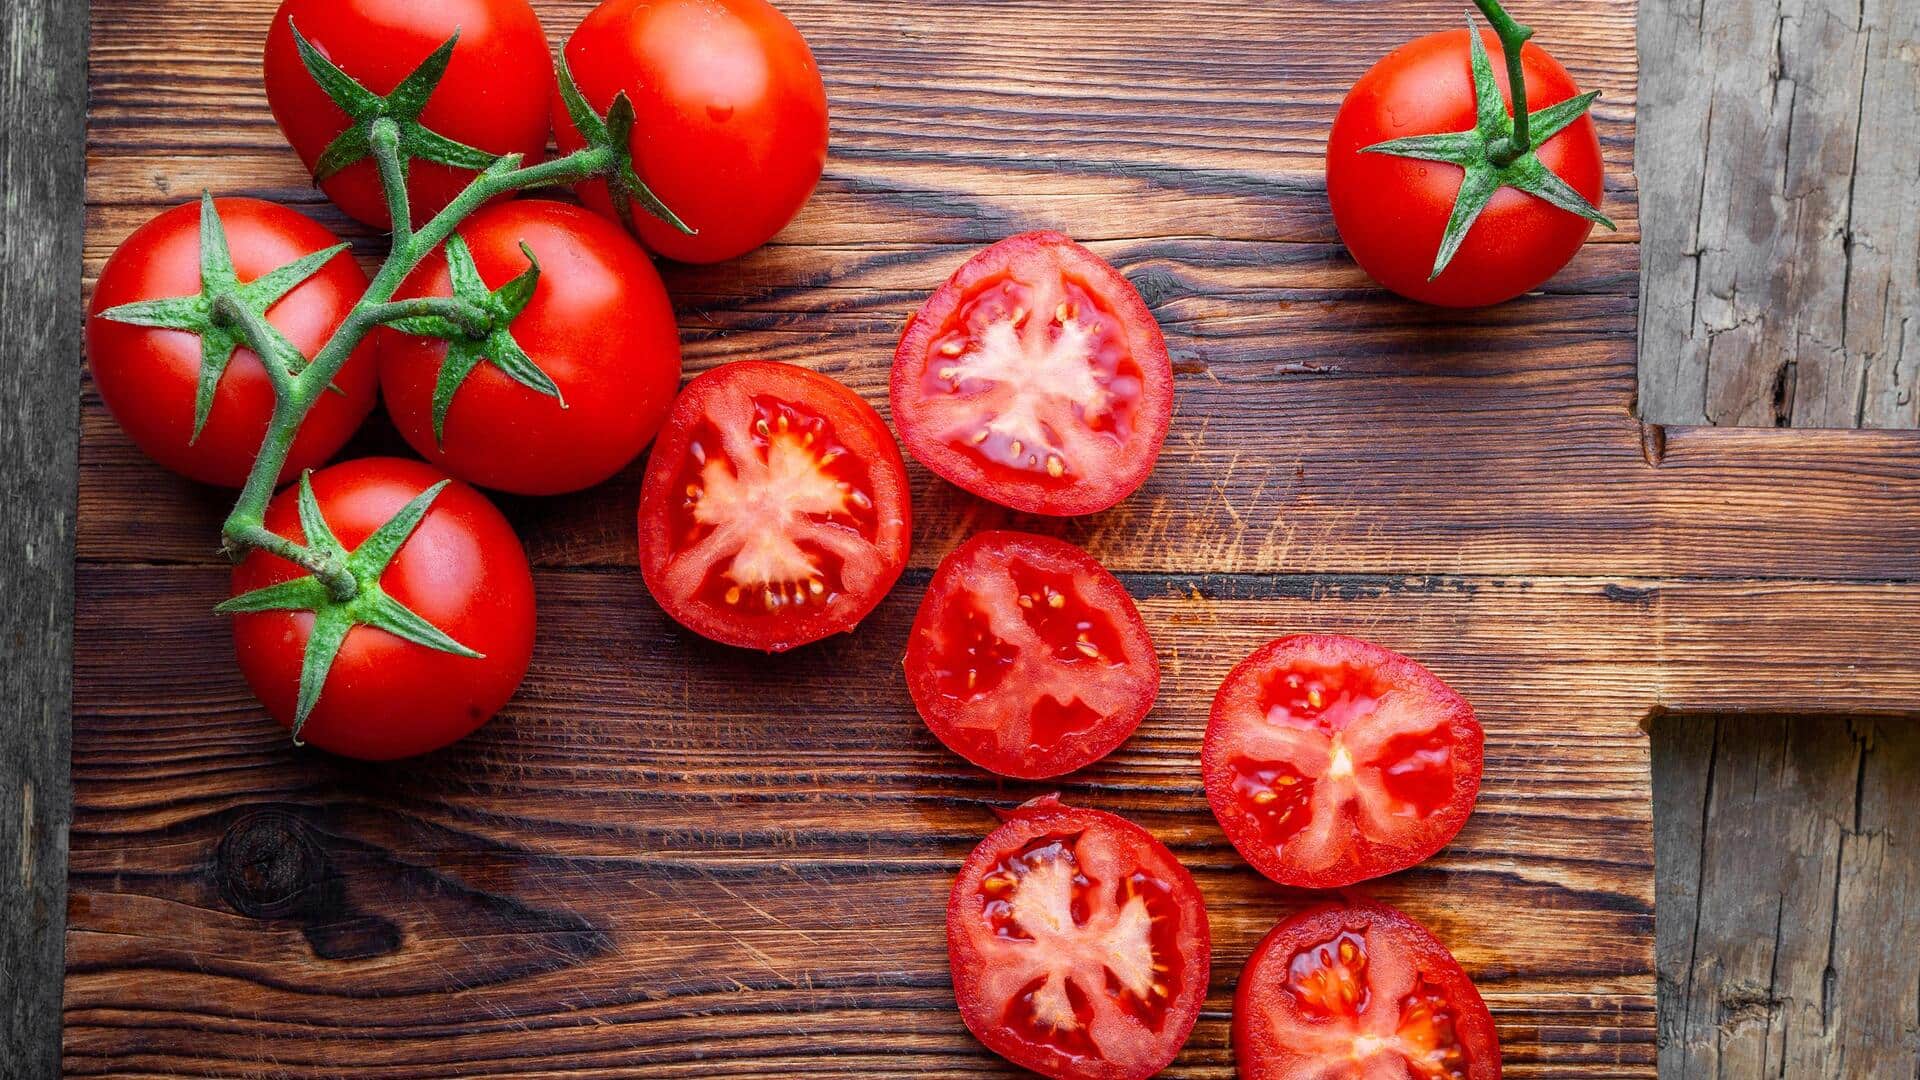 Want radiant skin? Try these 5 tomato face packs